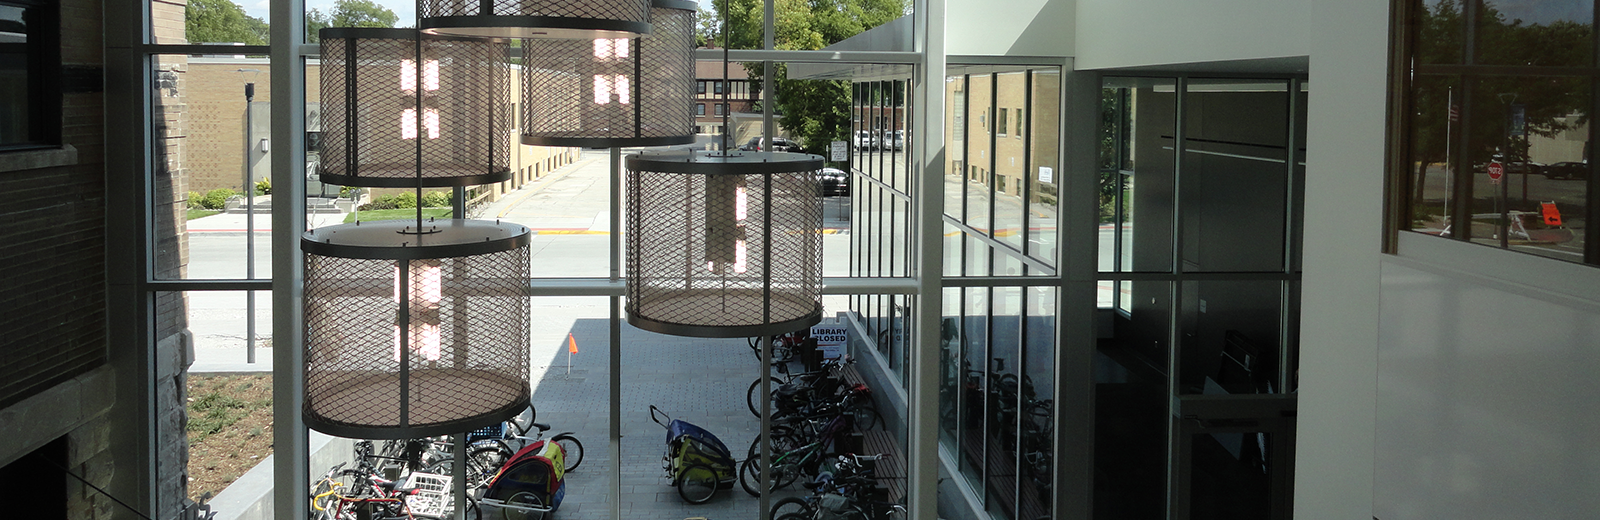 Bike racks seen through chandeliers and glass of Ames Pubic Library